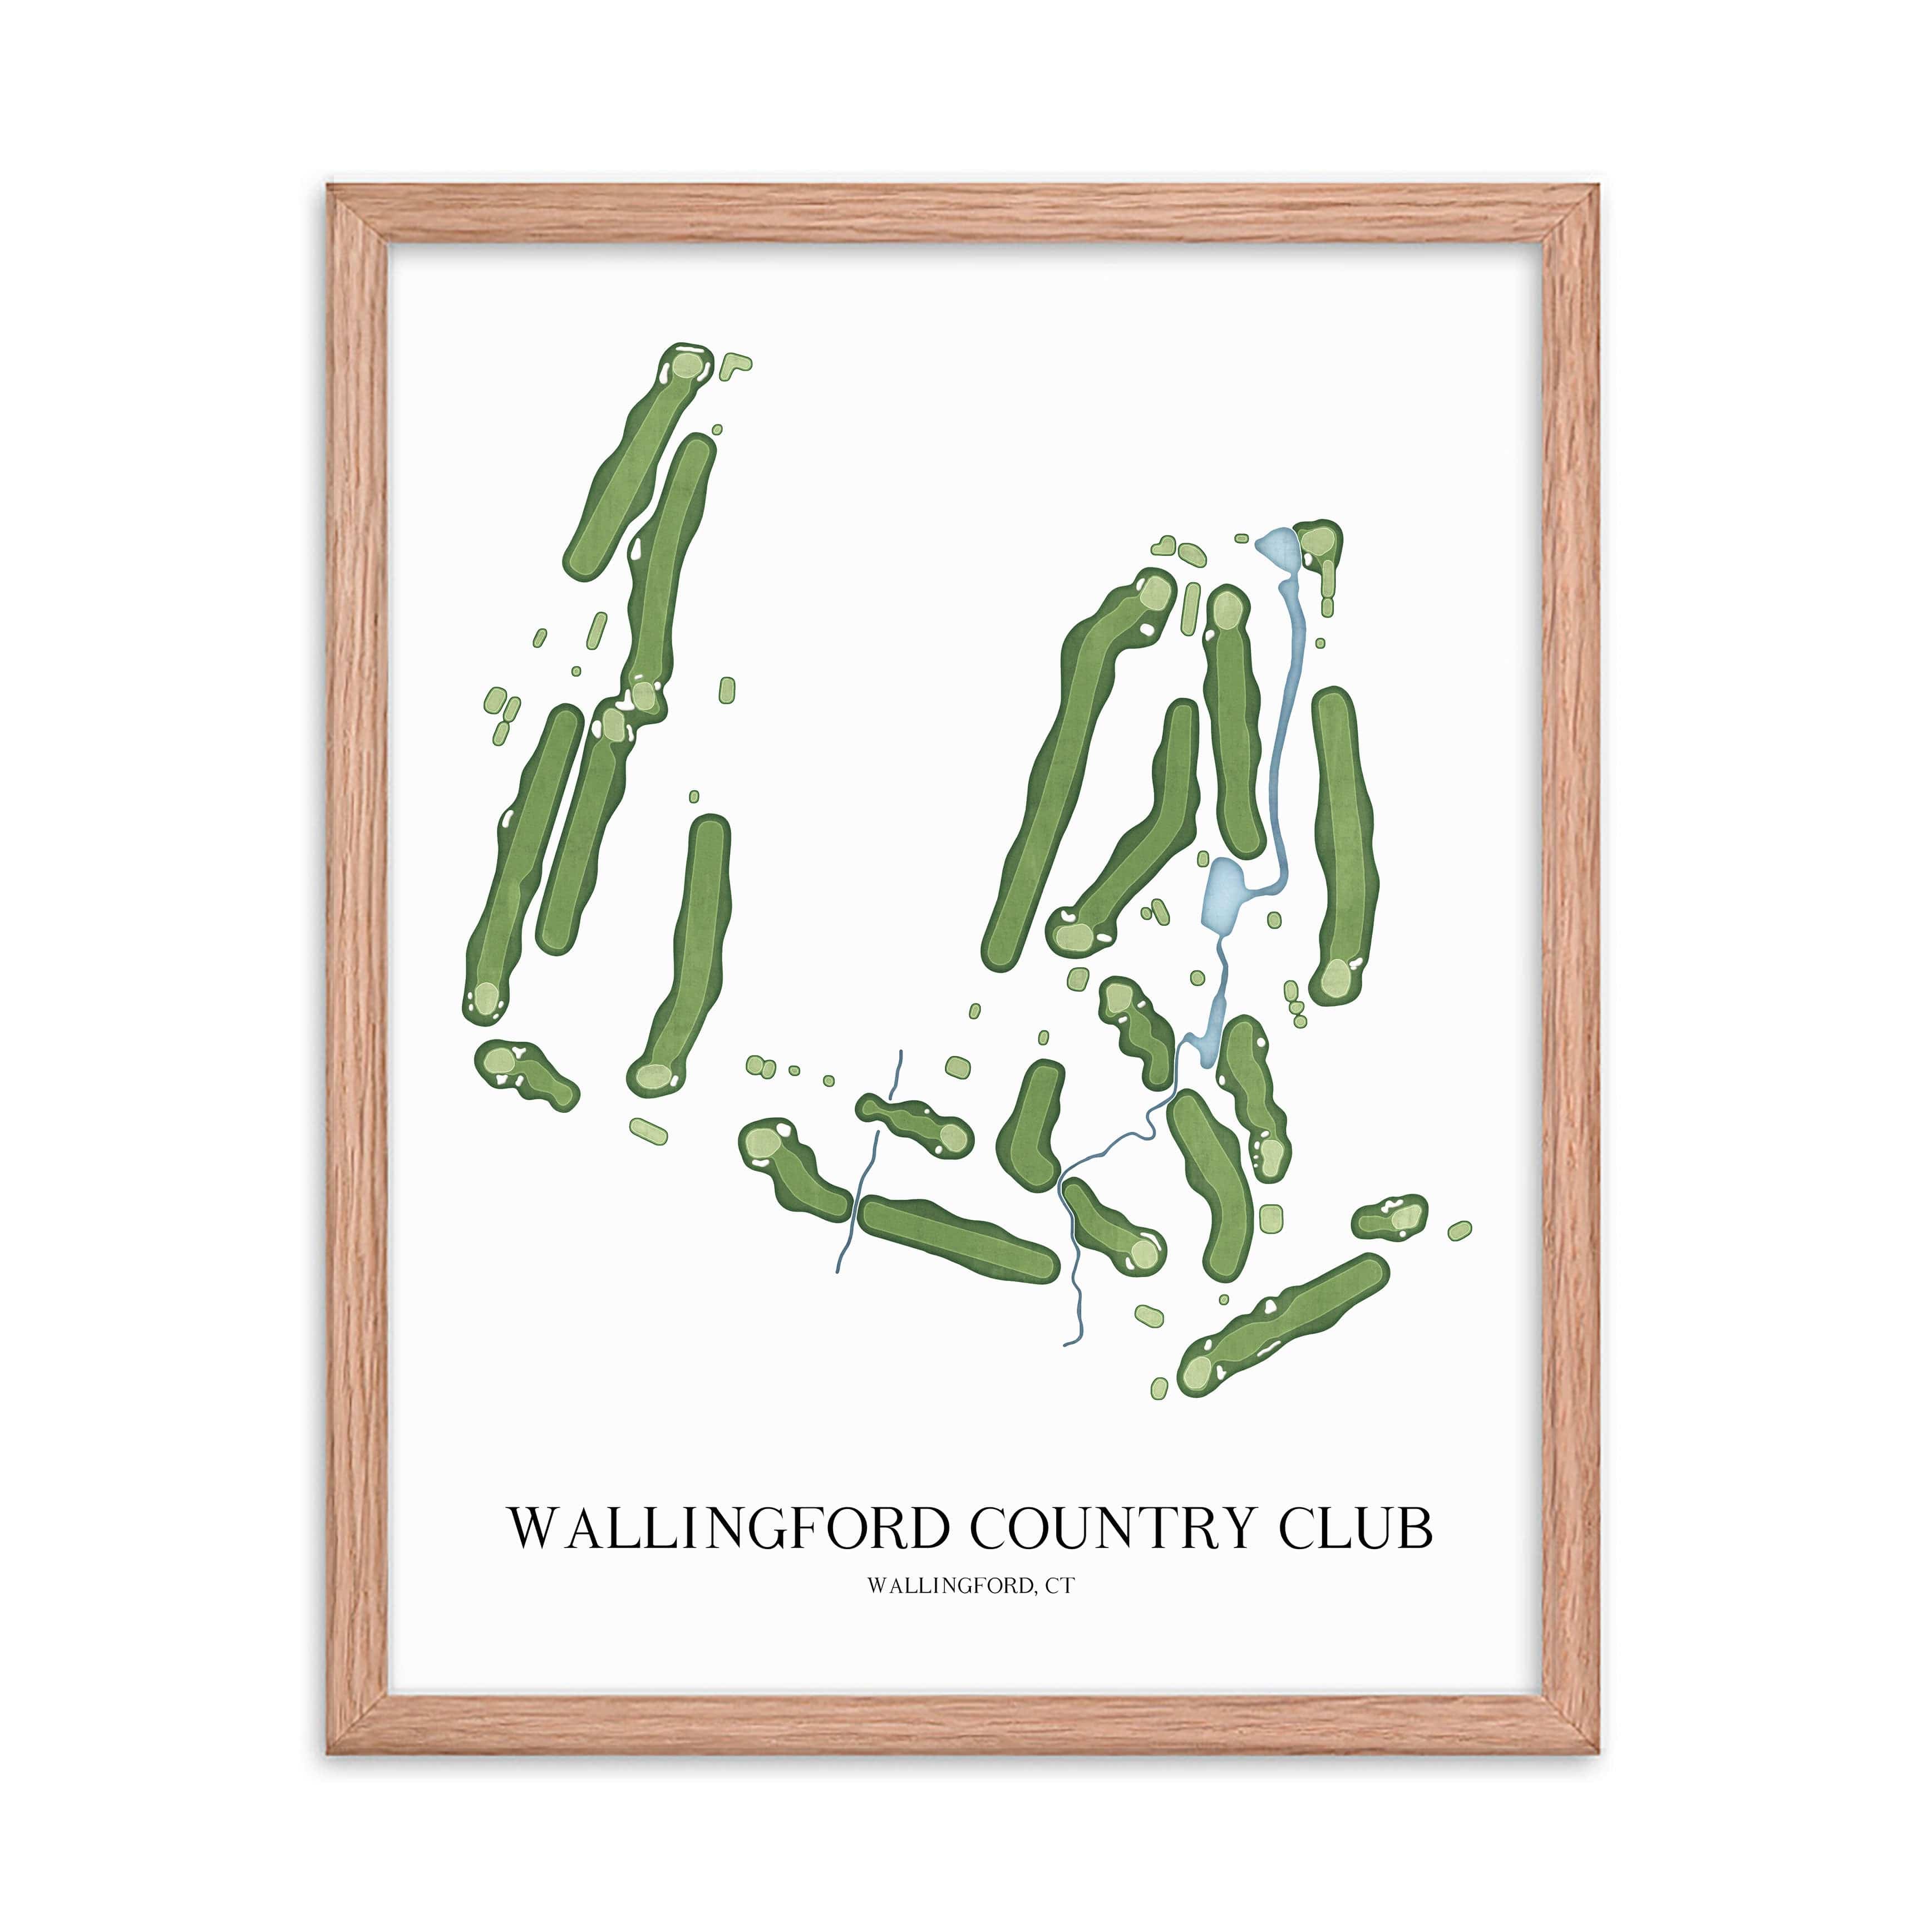 The 19th Hole Golf Shop - Golf Course Prints -  Wallingford Country Club Golf Course Map